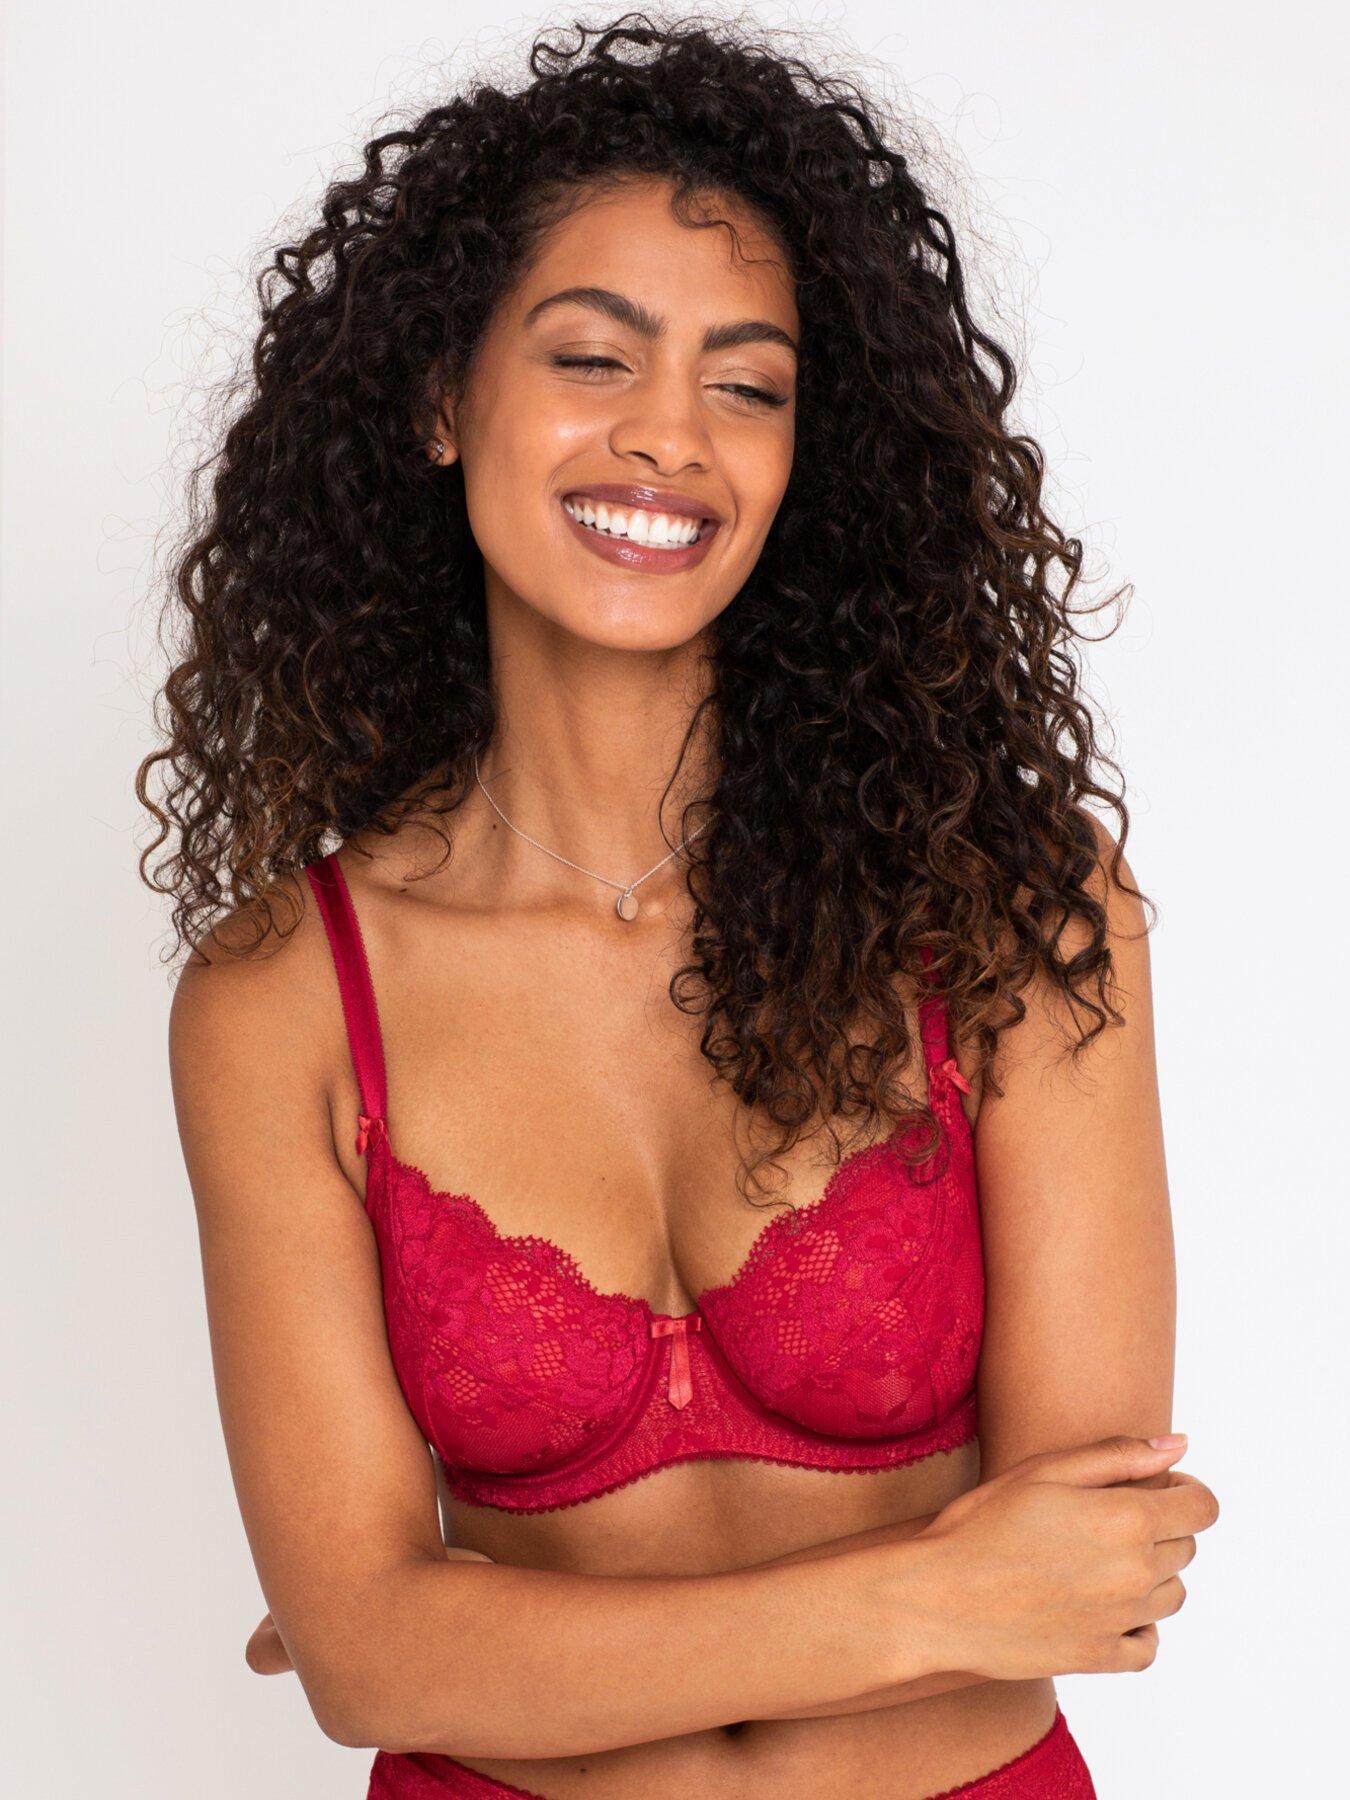 Pour Moi Amour Fuller Bust padded balconette bra in black and red